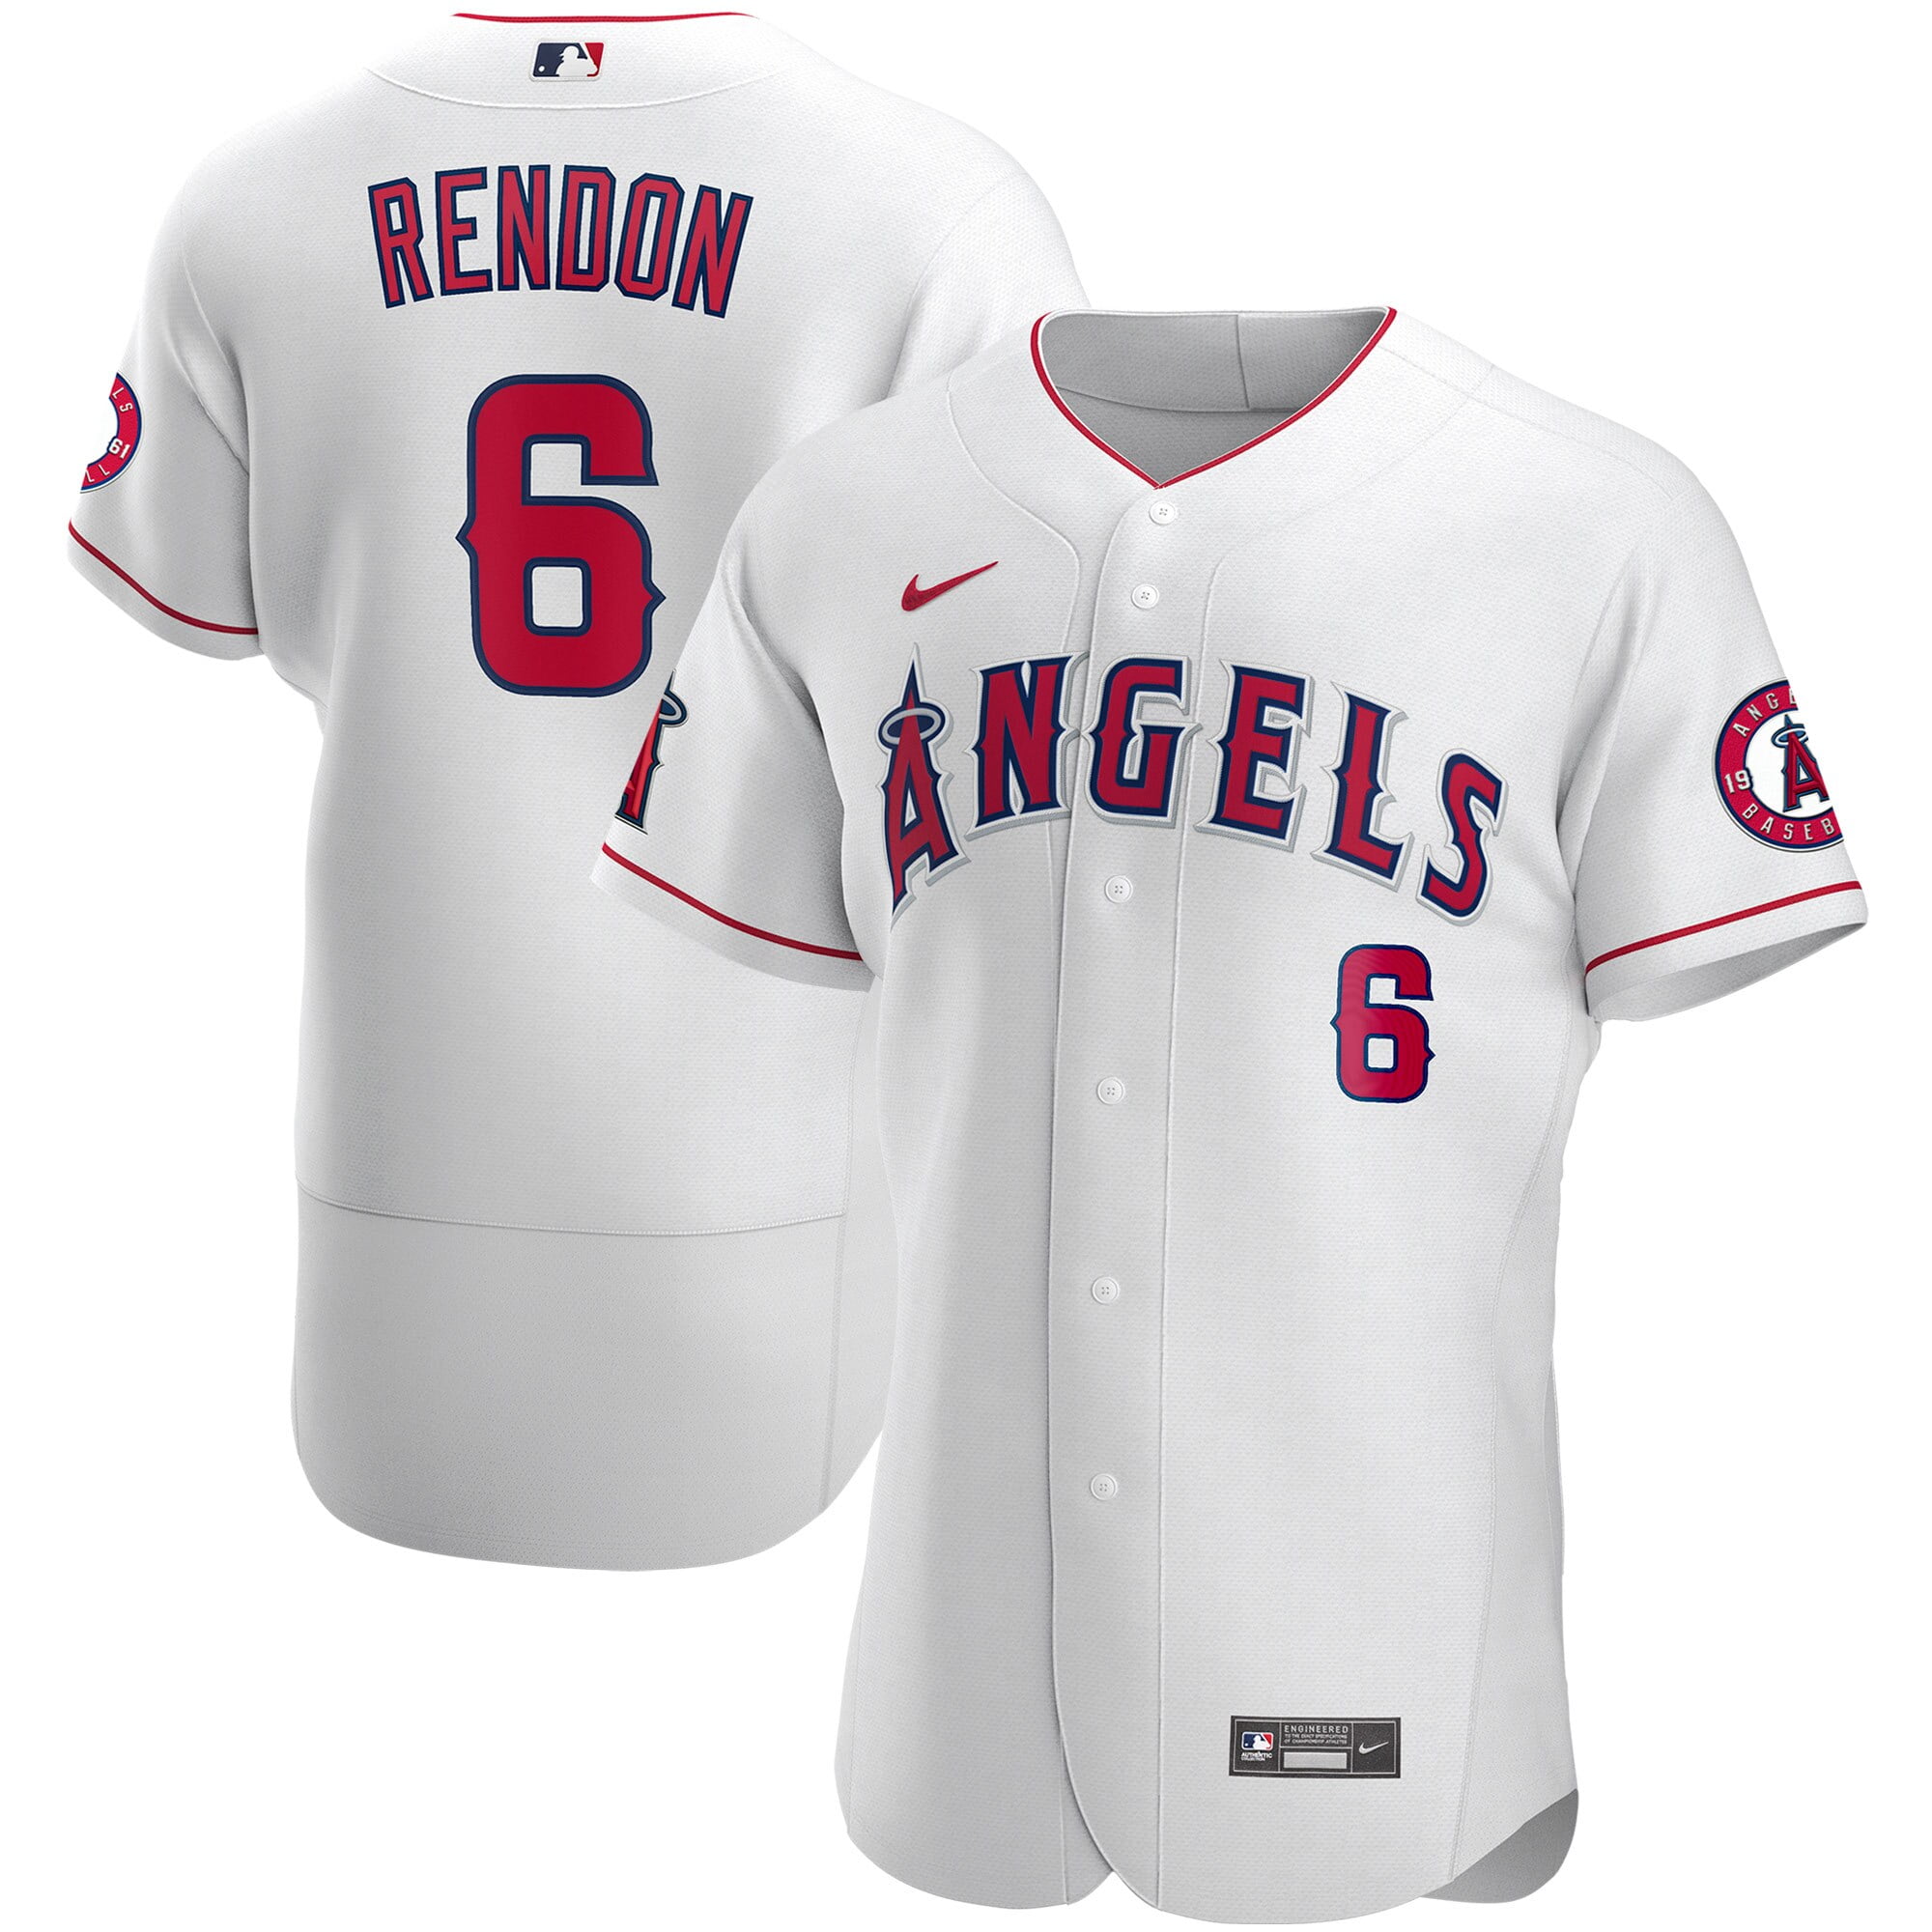 Angels player jersey